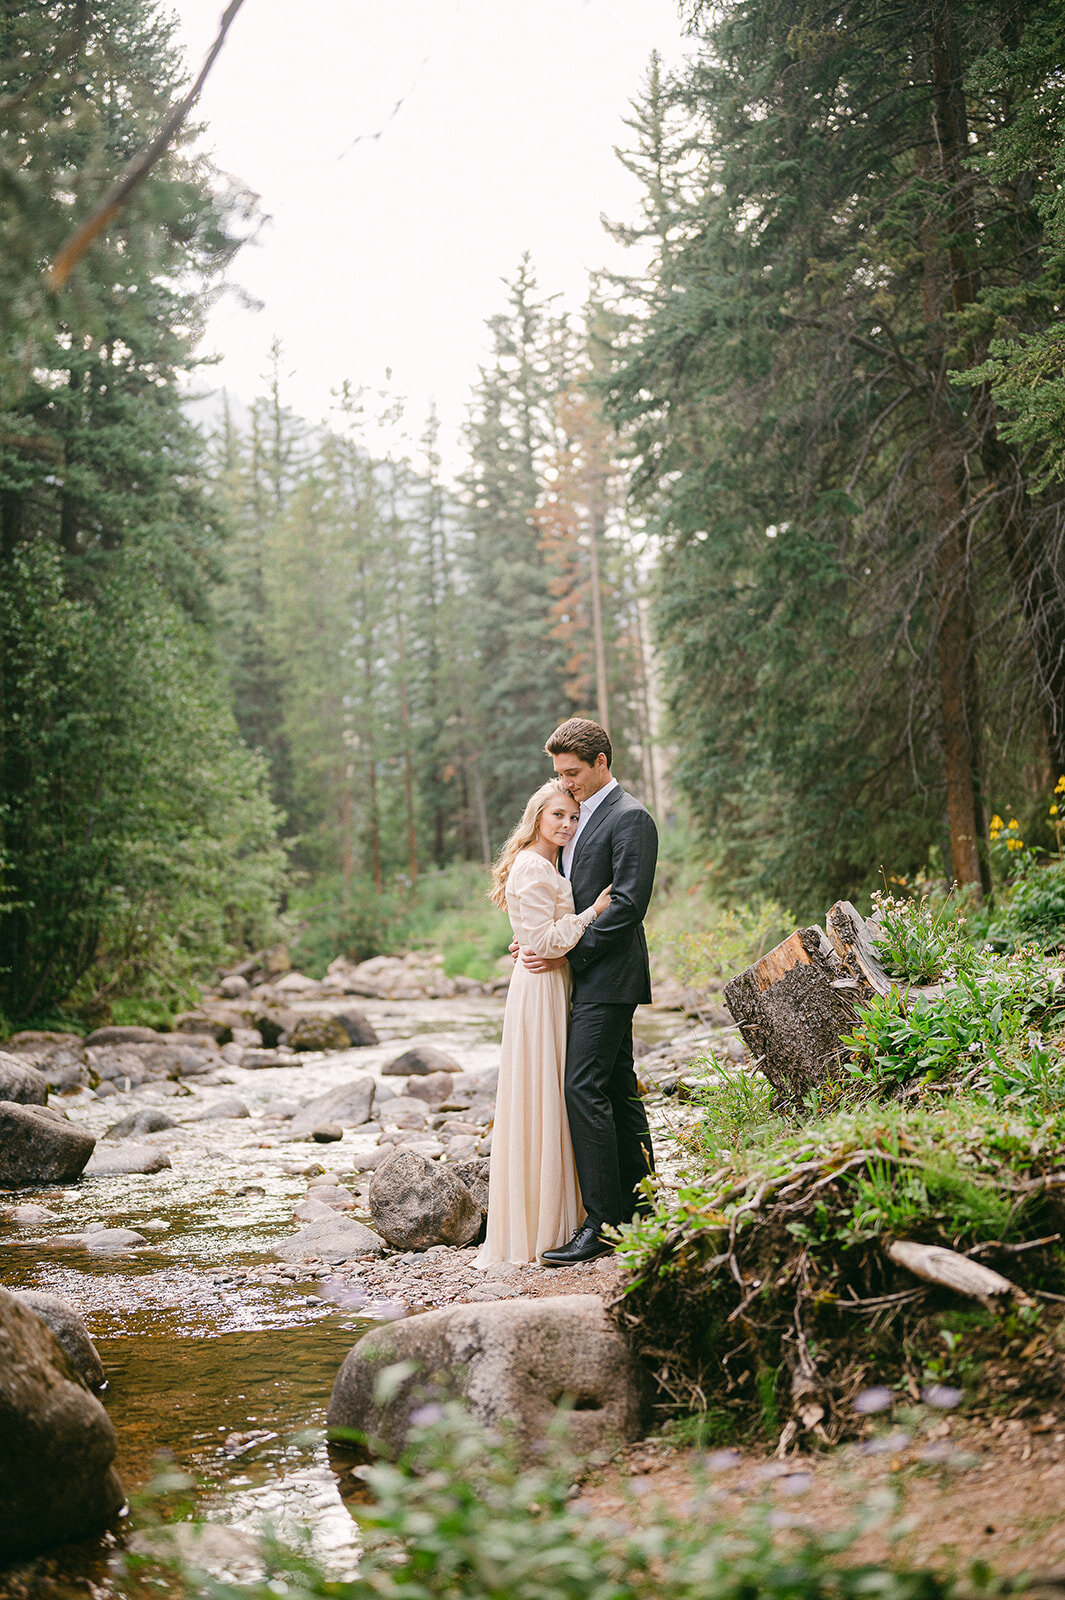 whimsical-vail-village-summer-engagement-by-jacie-marguerite-8